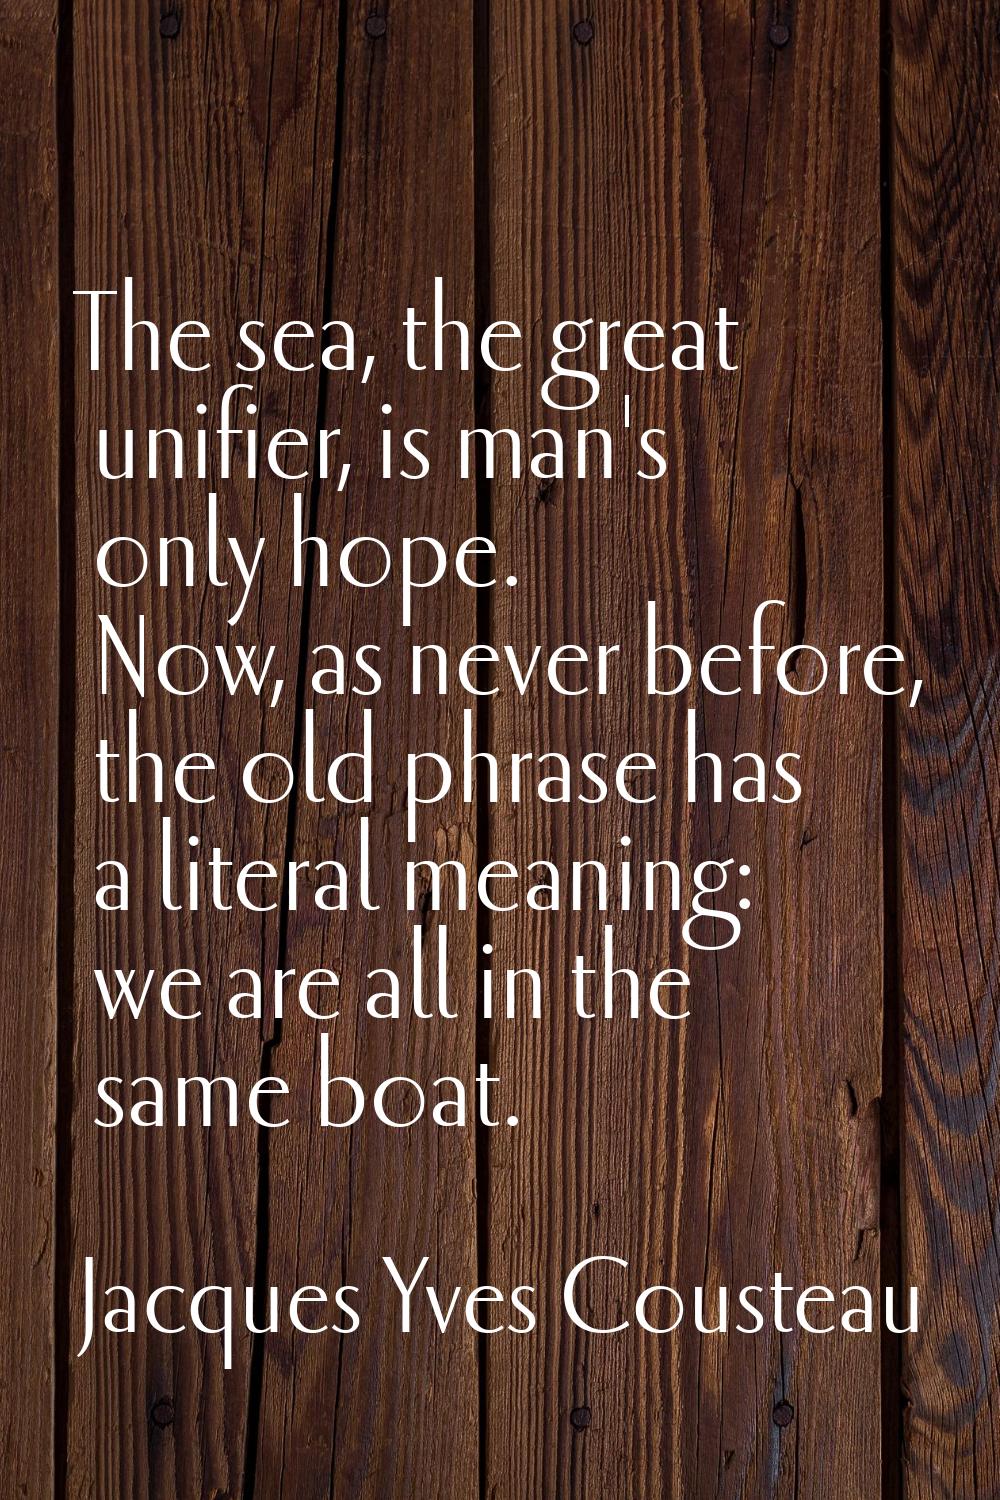 The sea, the great unifier, is man's only hope. Now, as never before, the old phrase has a literal 